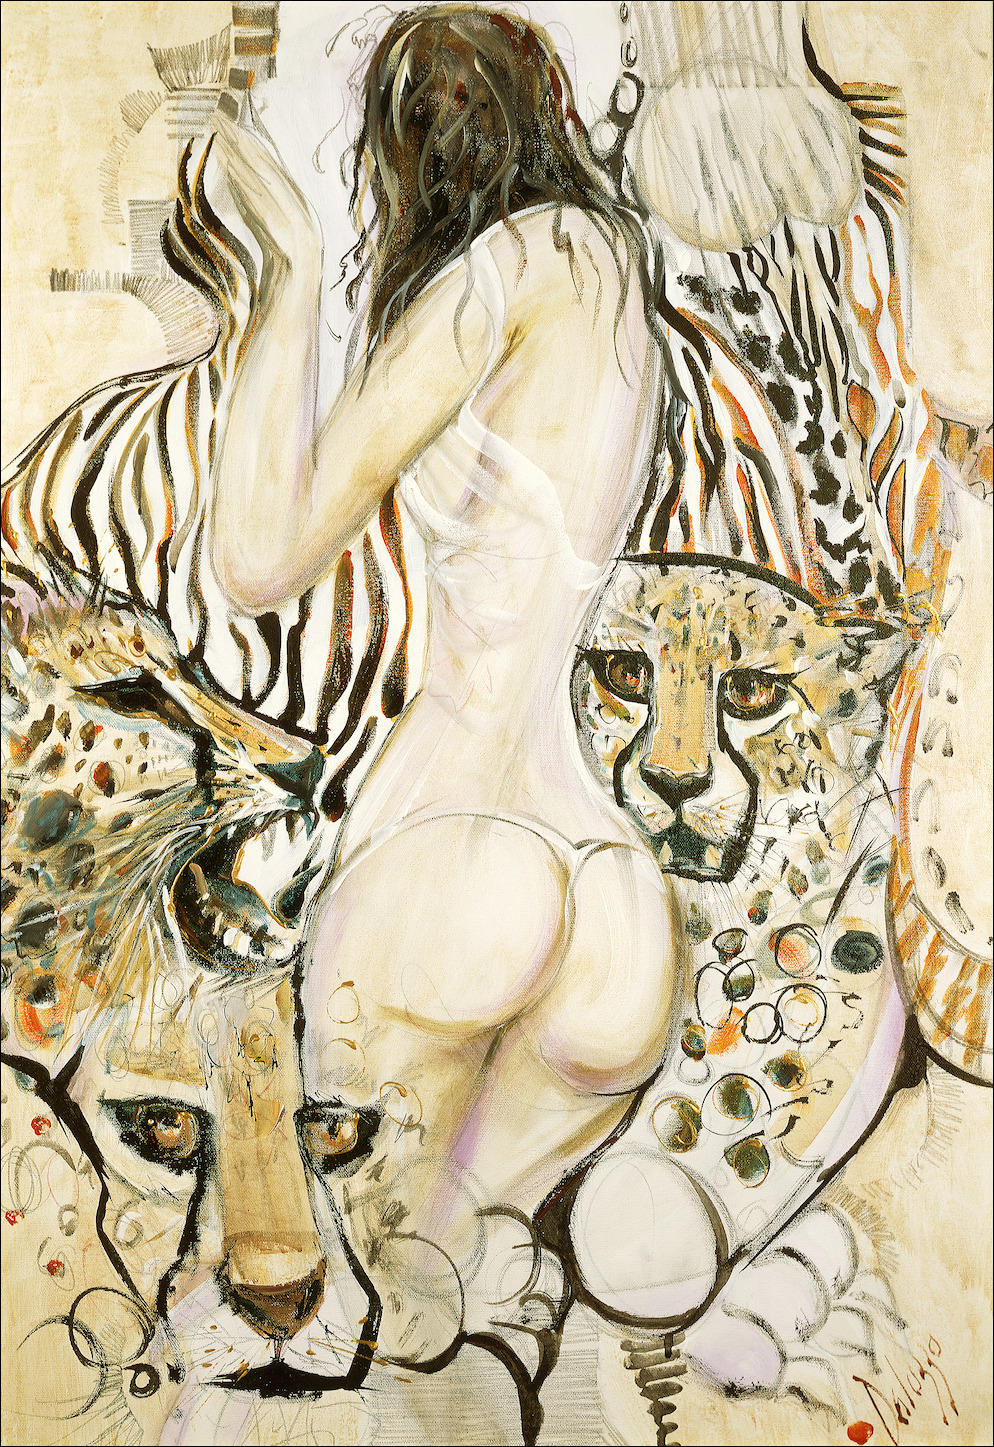 Wild And Free Nude "Animal Spirit 2" Original Artwork by Lucette Dalozzo